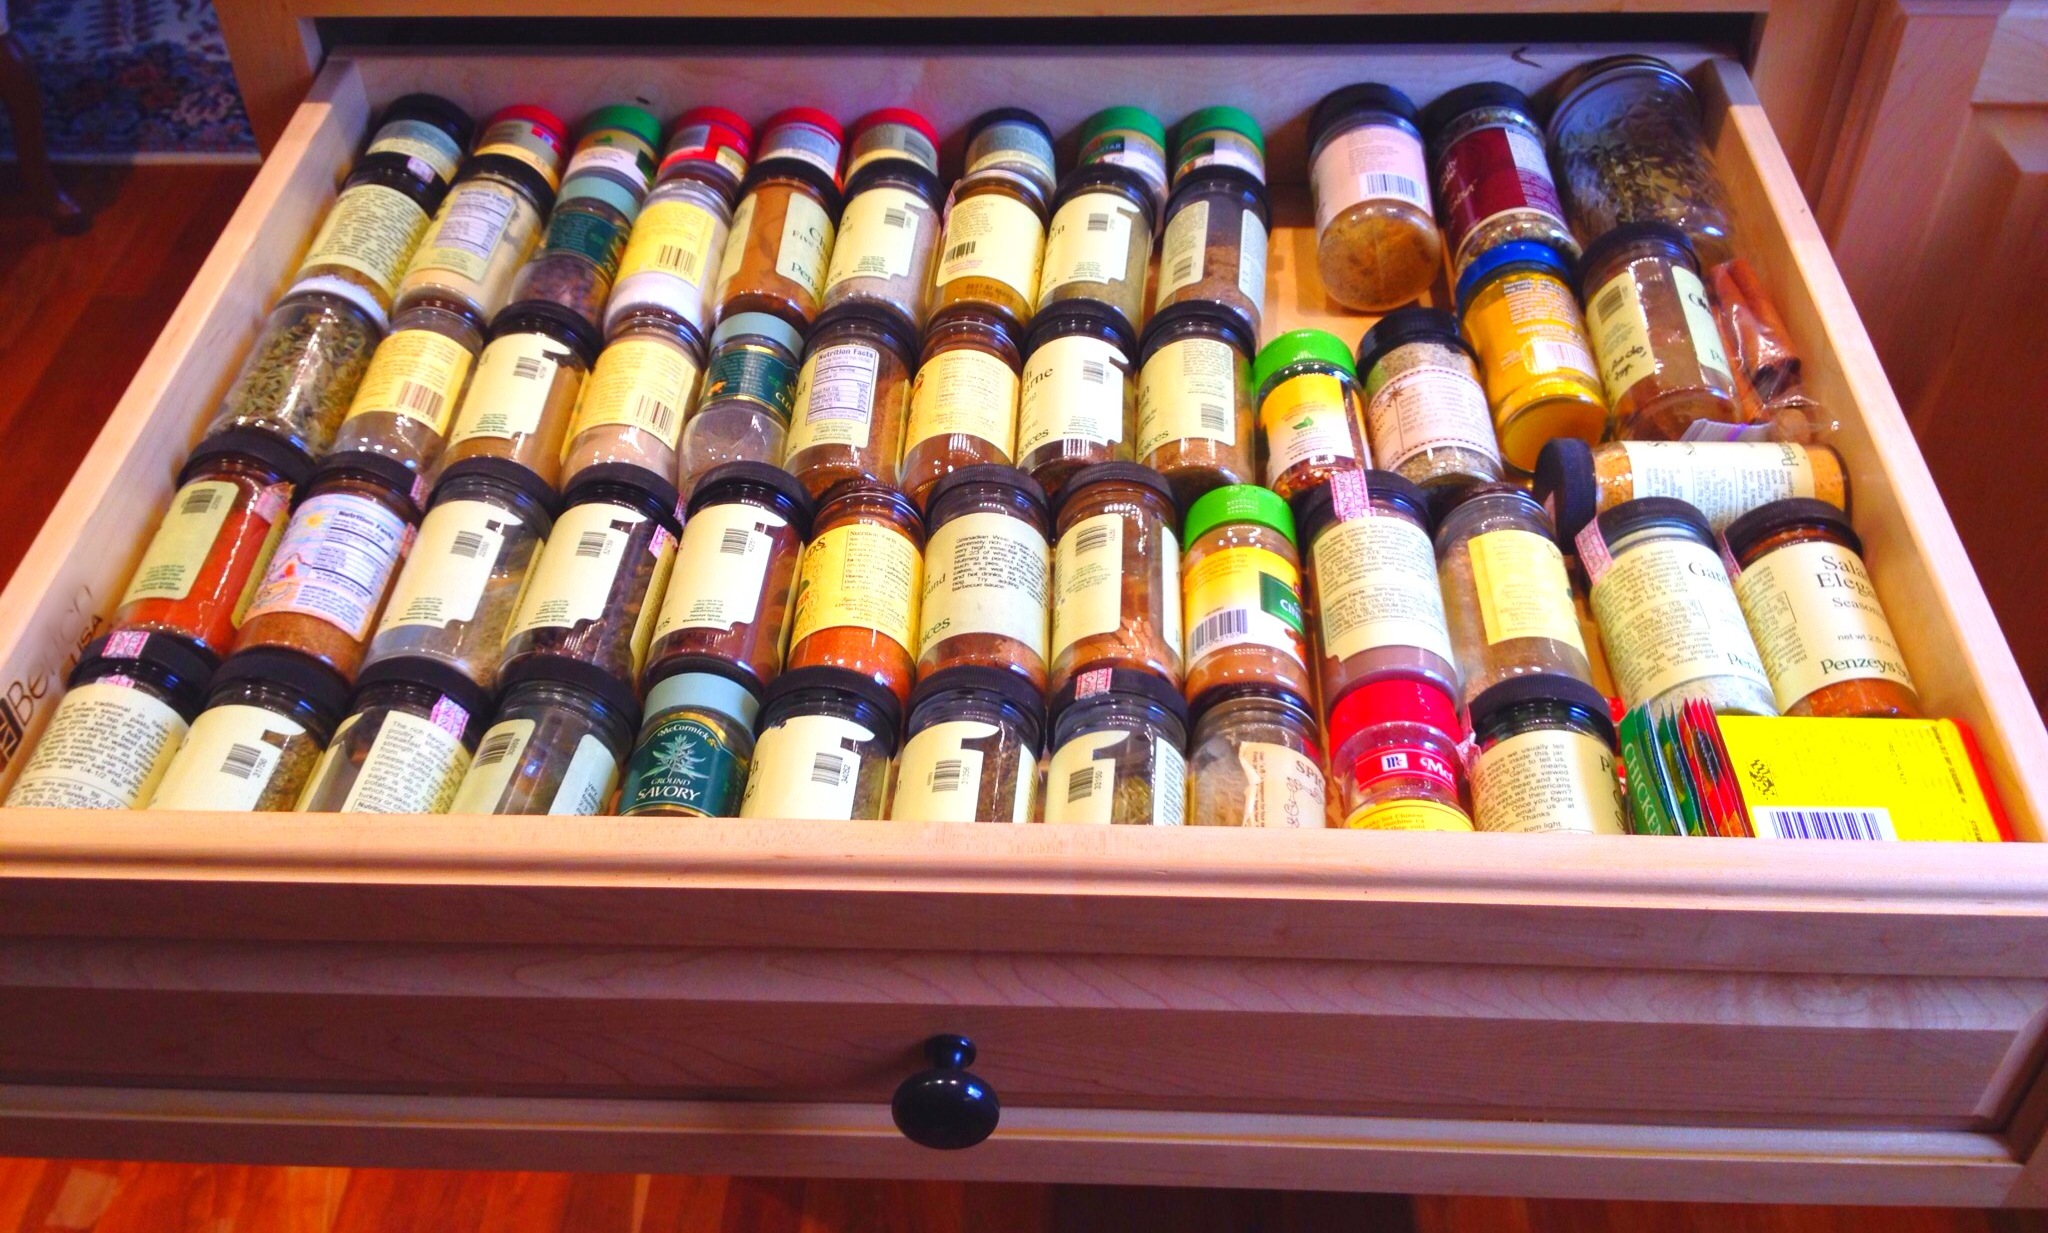 spice jars lay on their sides in a spice drawer